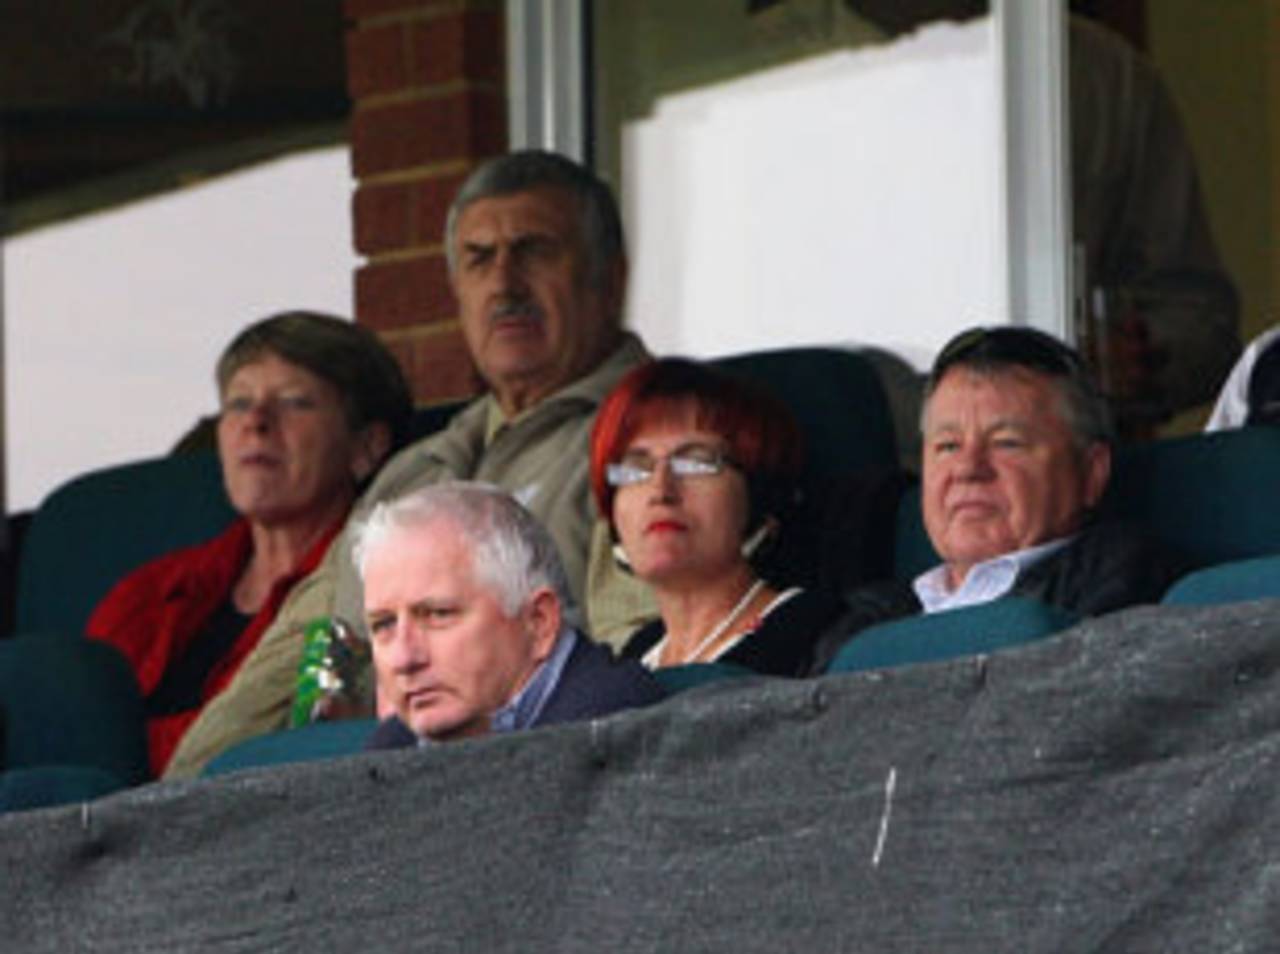 Duncan Fletcher, the South African batting consultant and Mike Procter, their convener of selectors, look on from the stands, South Africa A v England XI, Potchefstroom, November 17, 2009